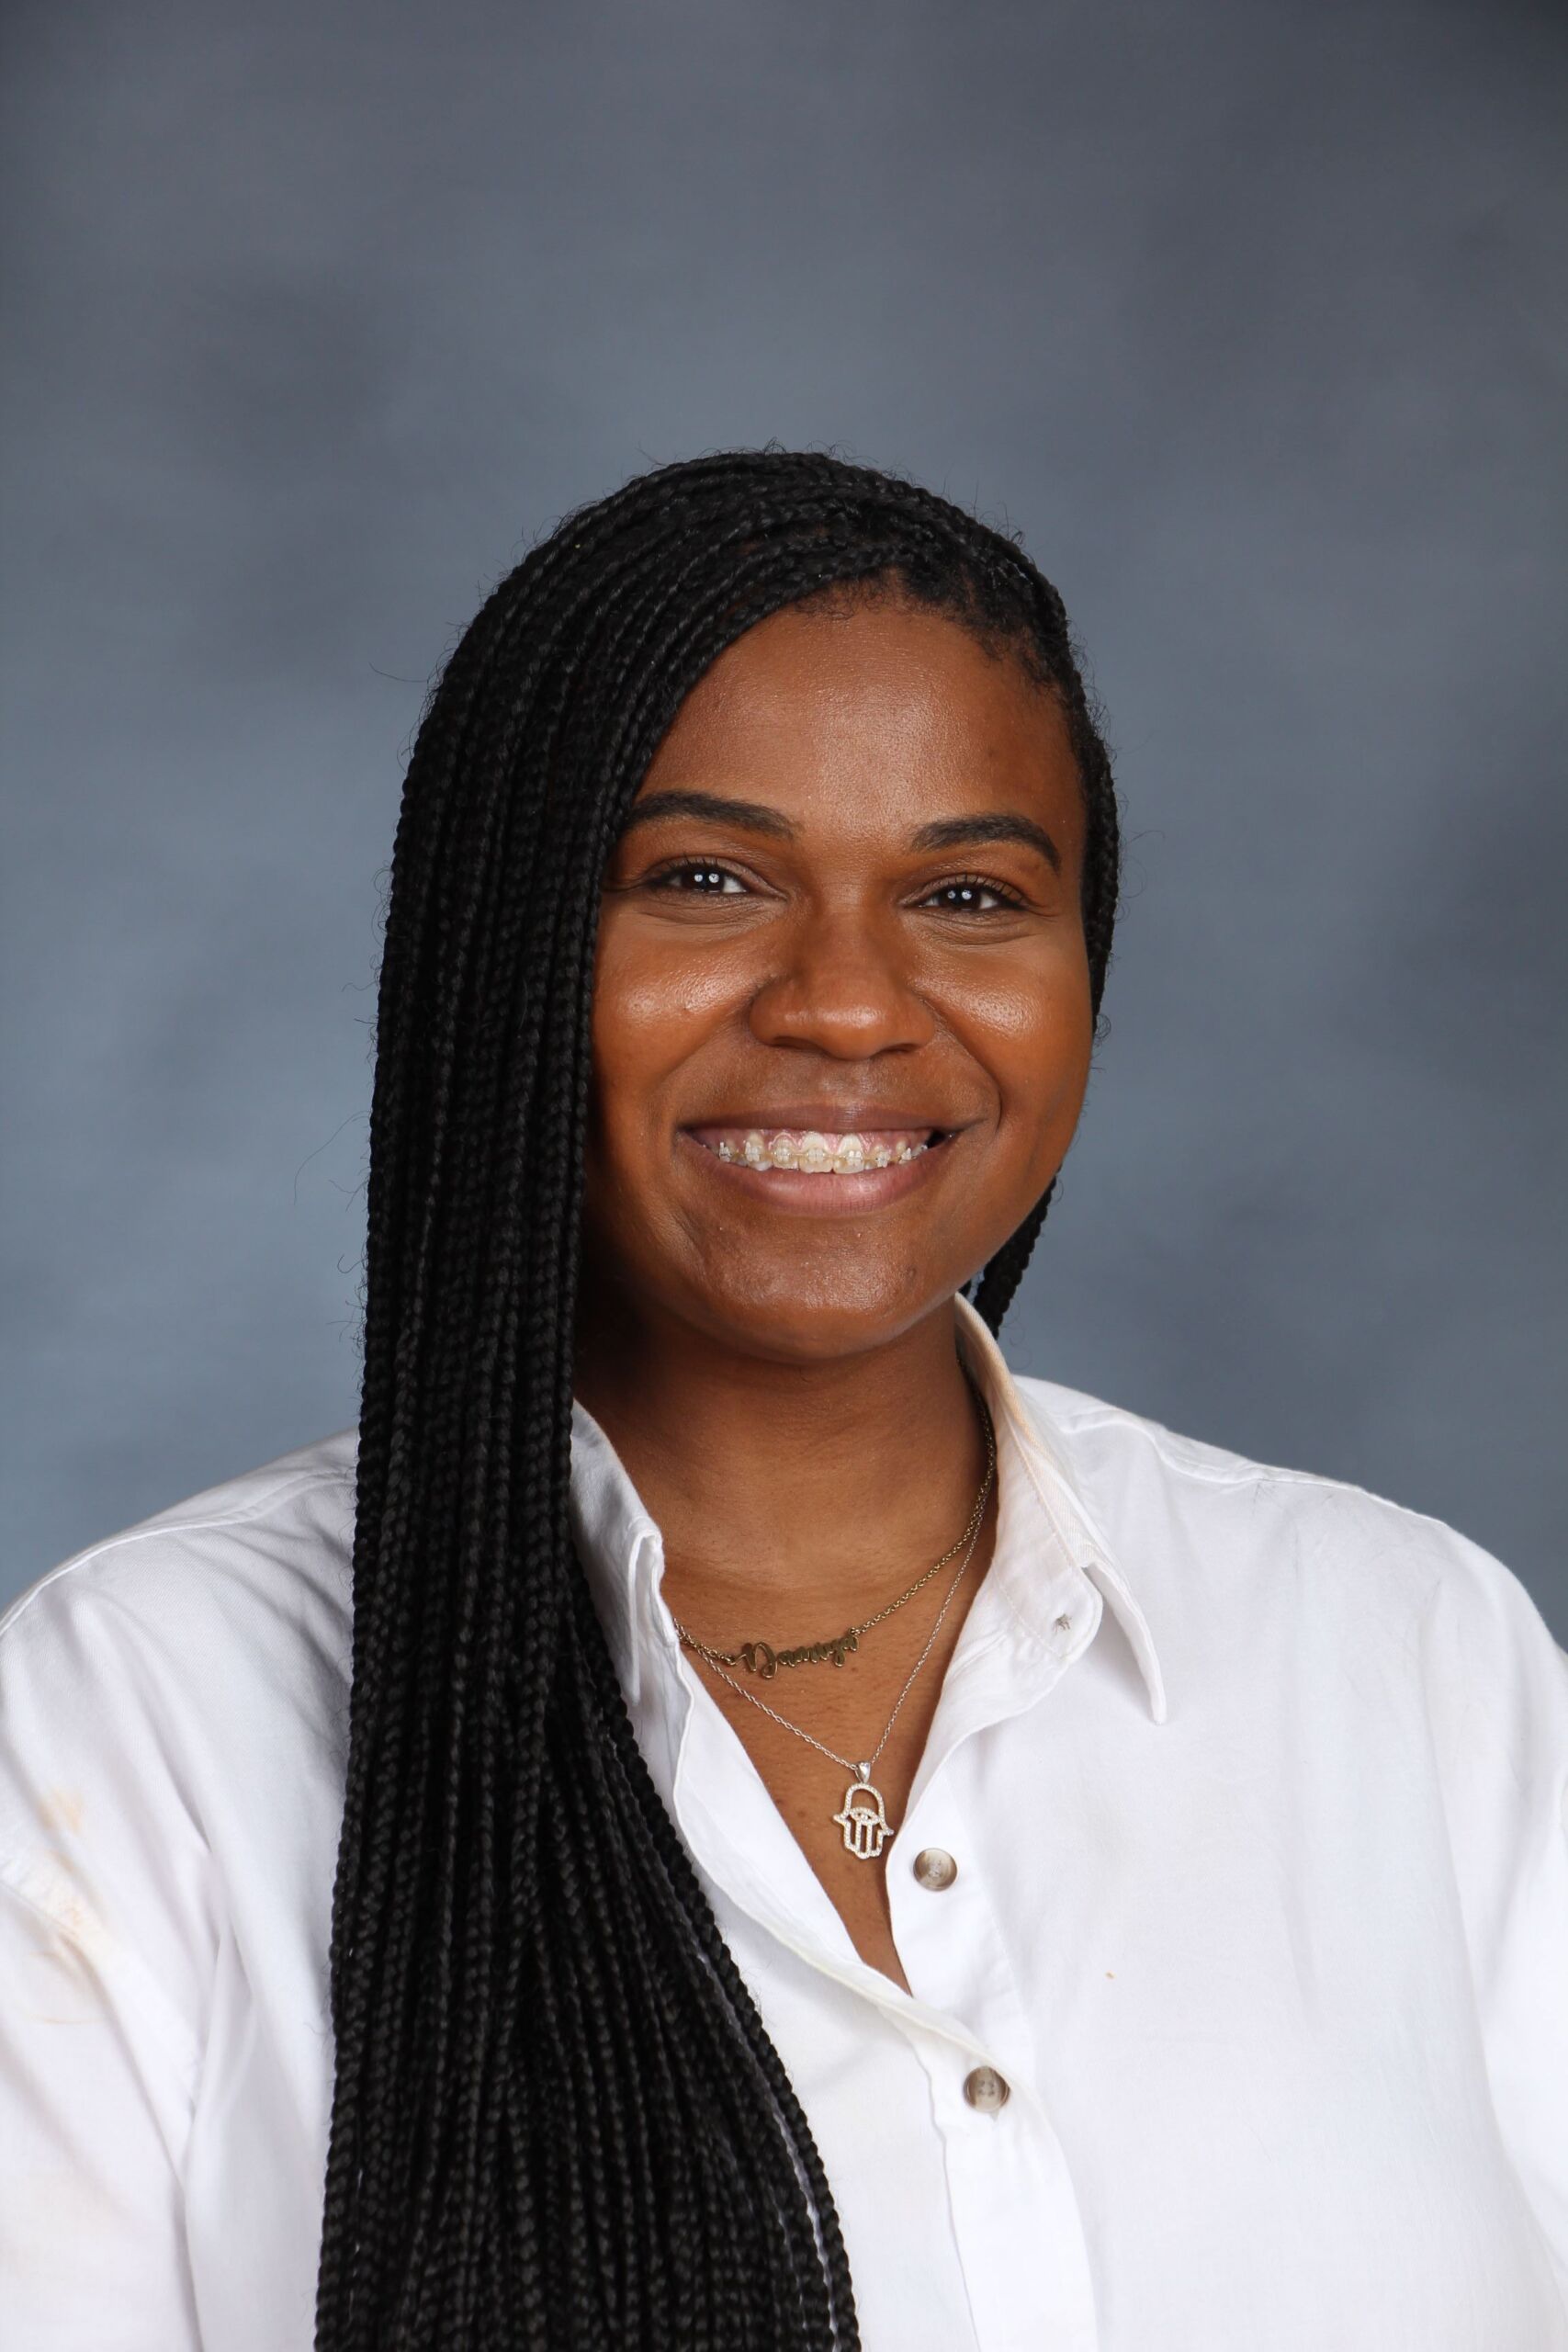 Damiya Perkins in a professional headshot. She is smiling, has braids, and wearing a white button up.